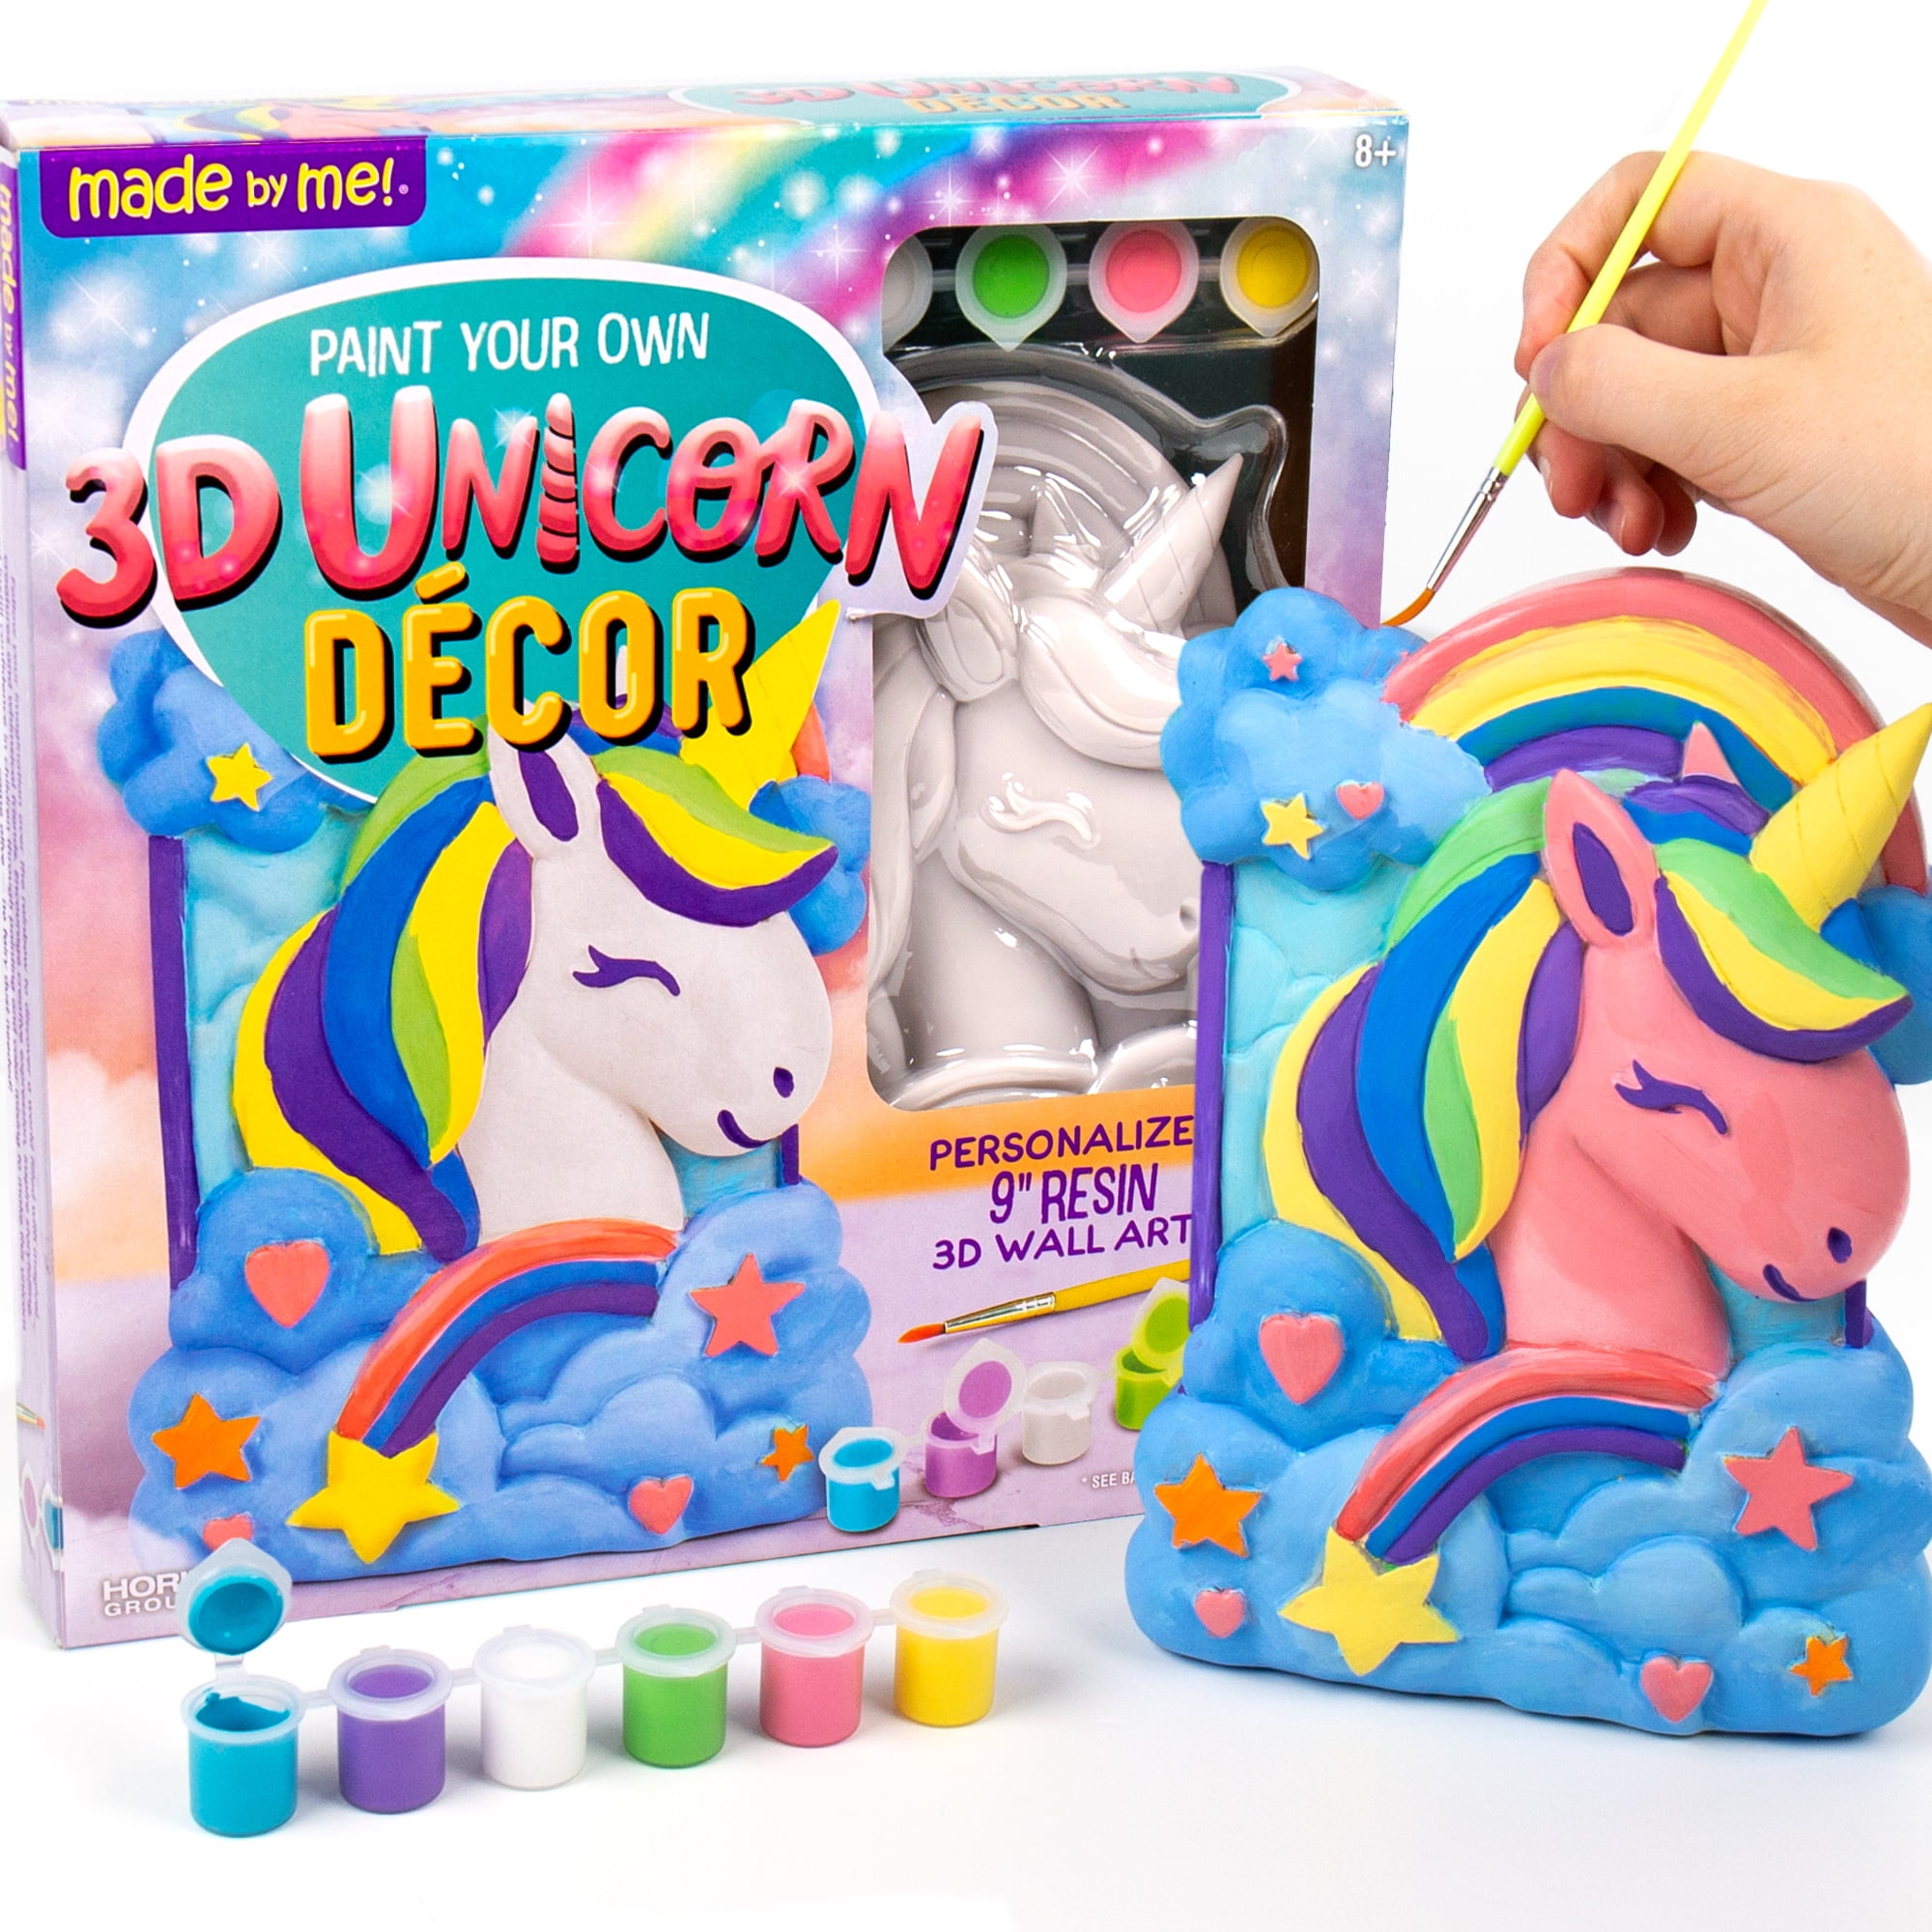 Made By Me Paint Your Own 3D Unicorn Dcor